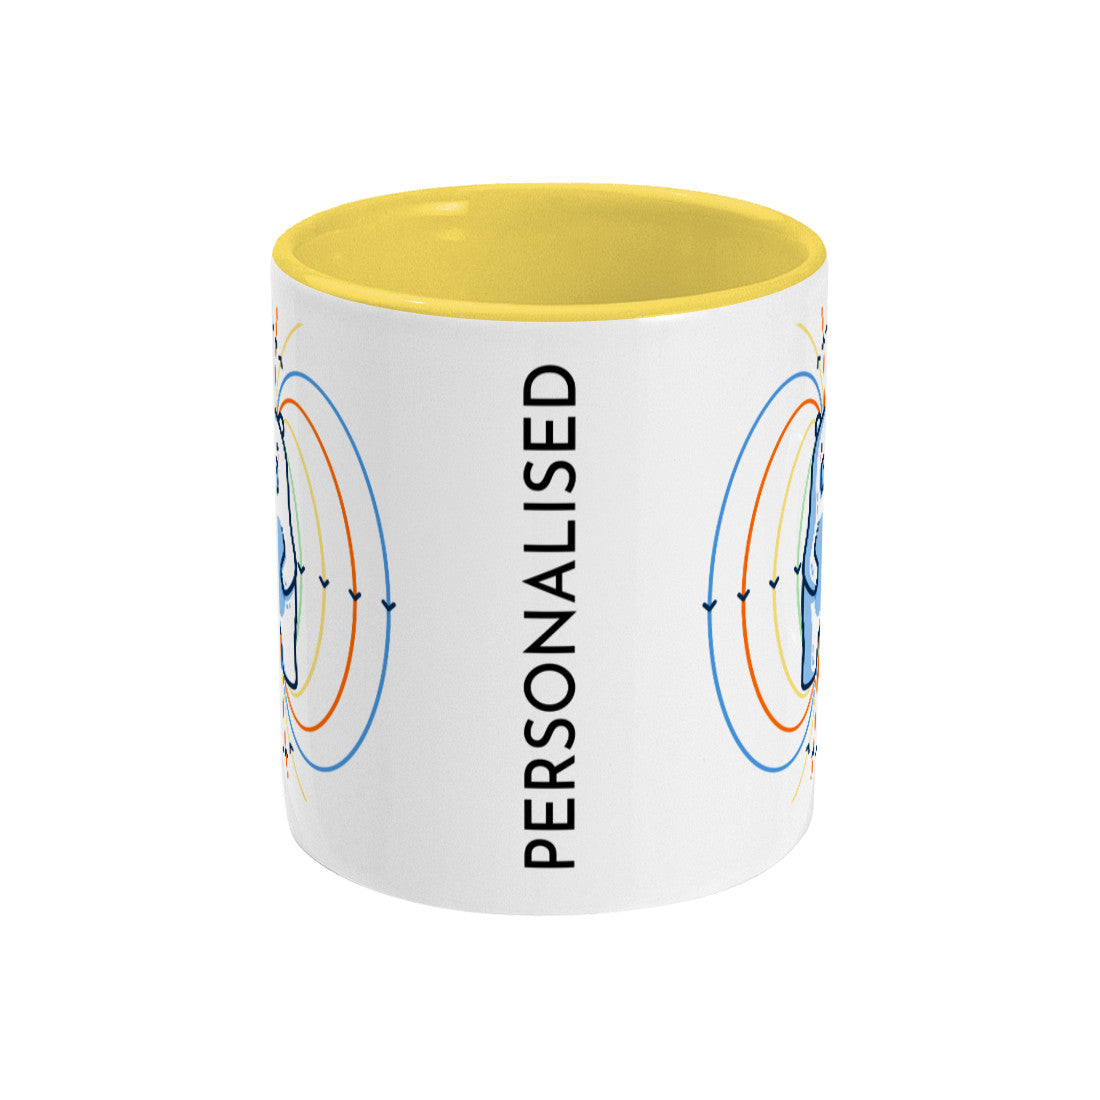 A two toned white and yellow ceramic mug, side view with handle hidden behind, showing the edge of the designs to front and back of the mug and the word personalised vertically between them.